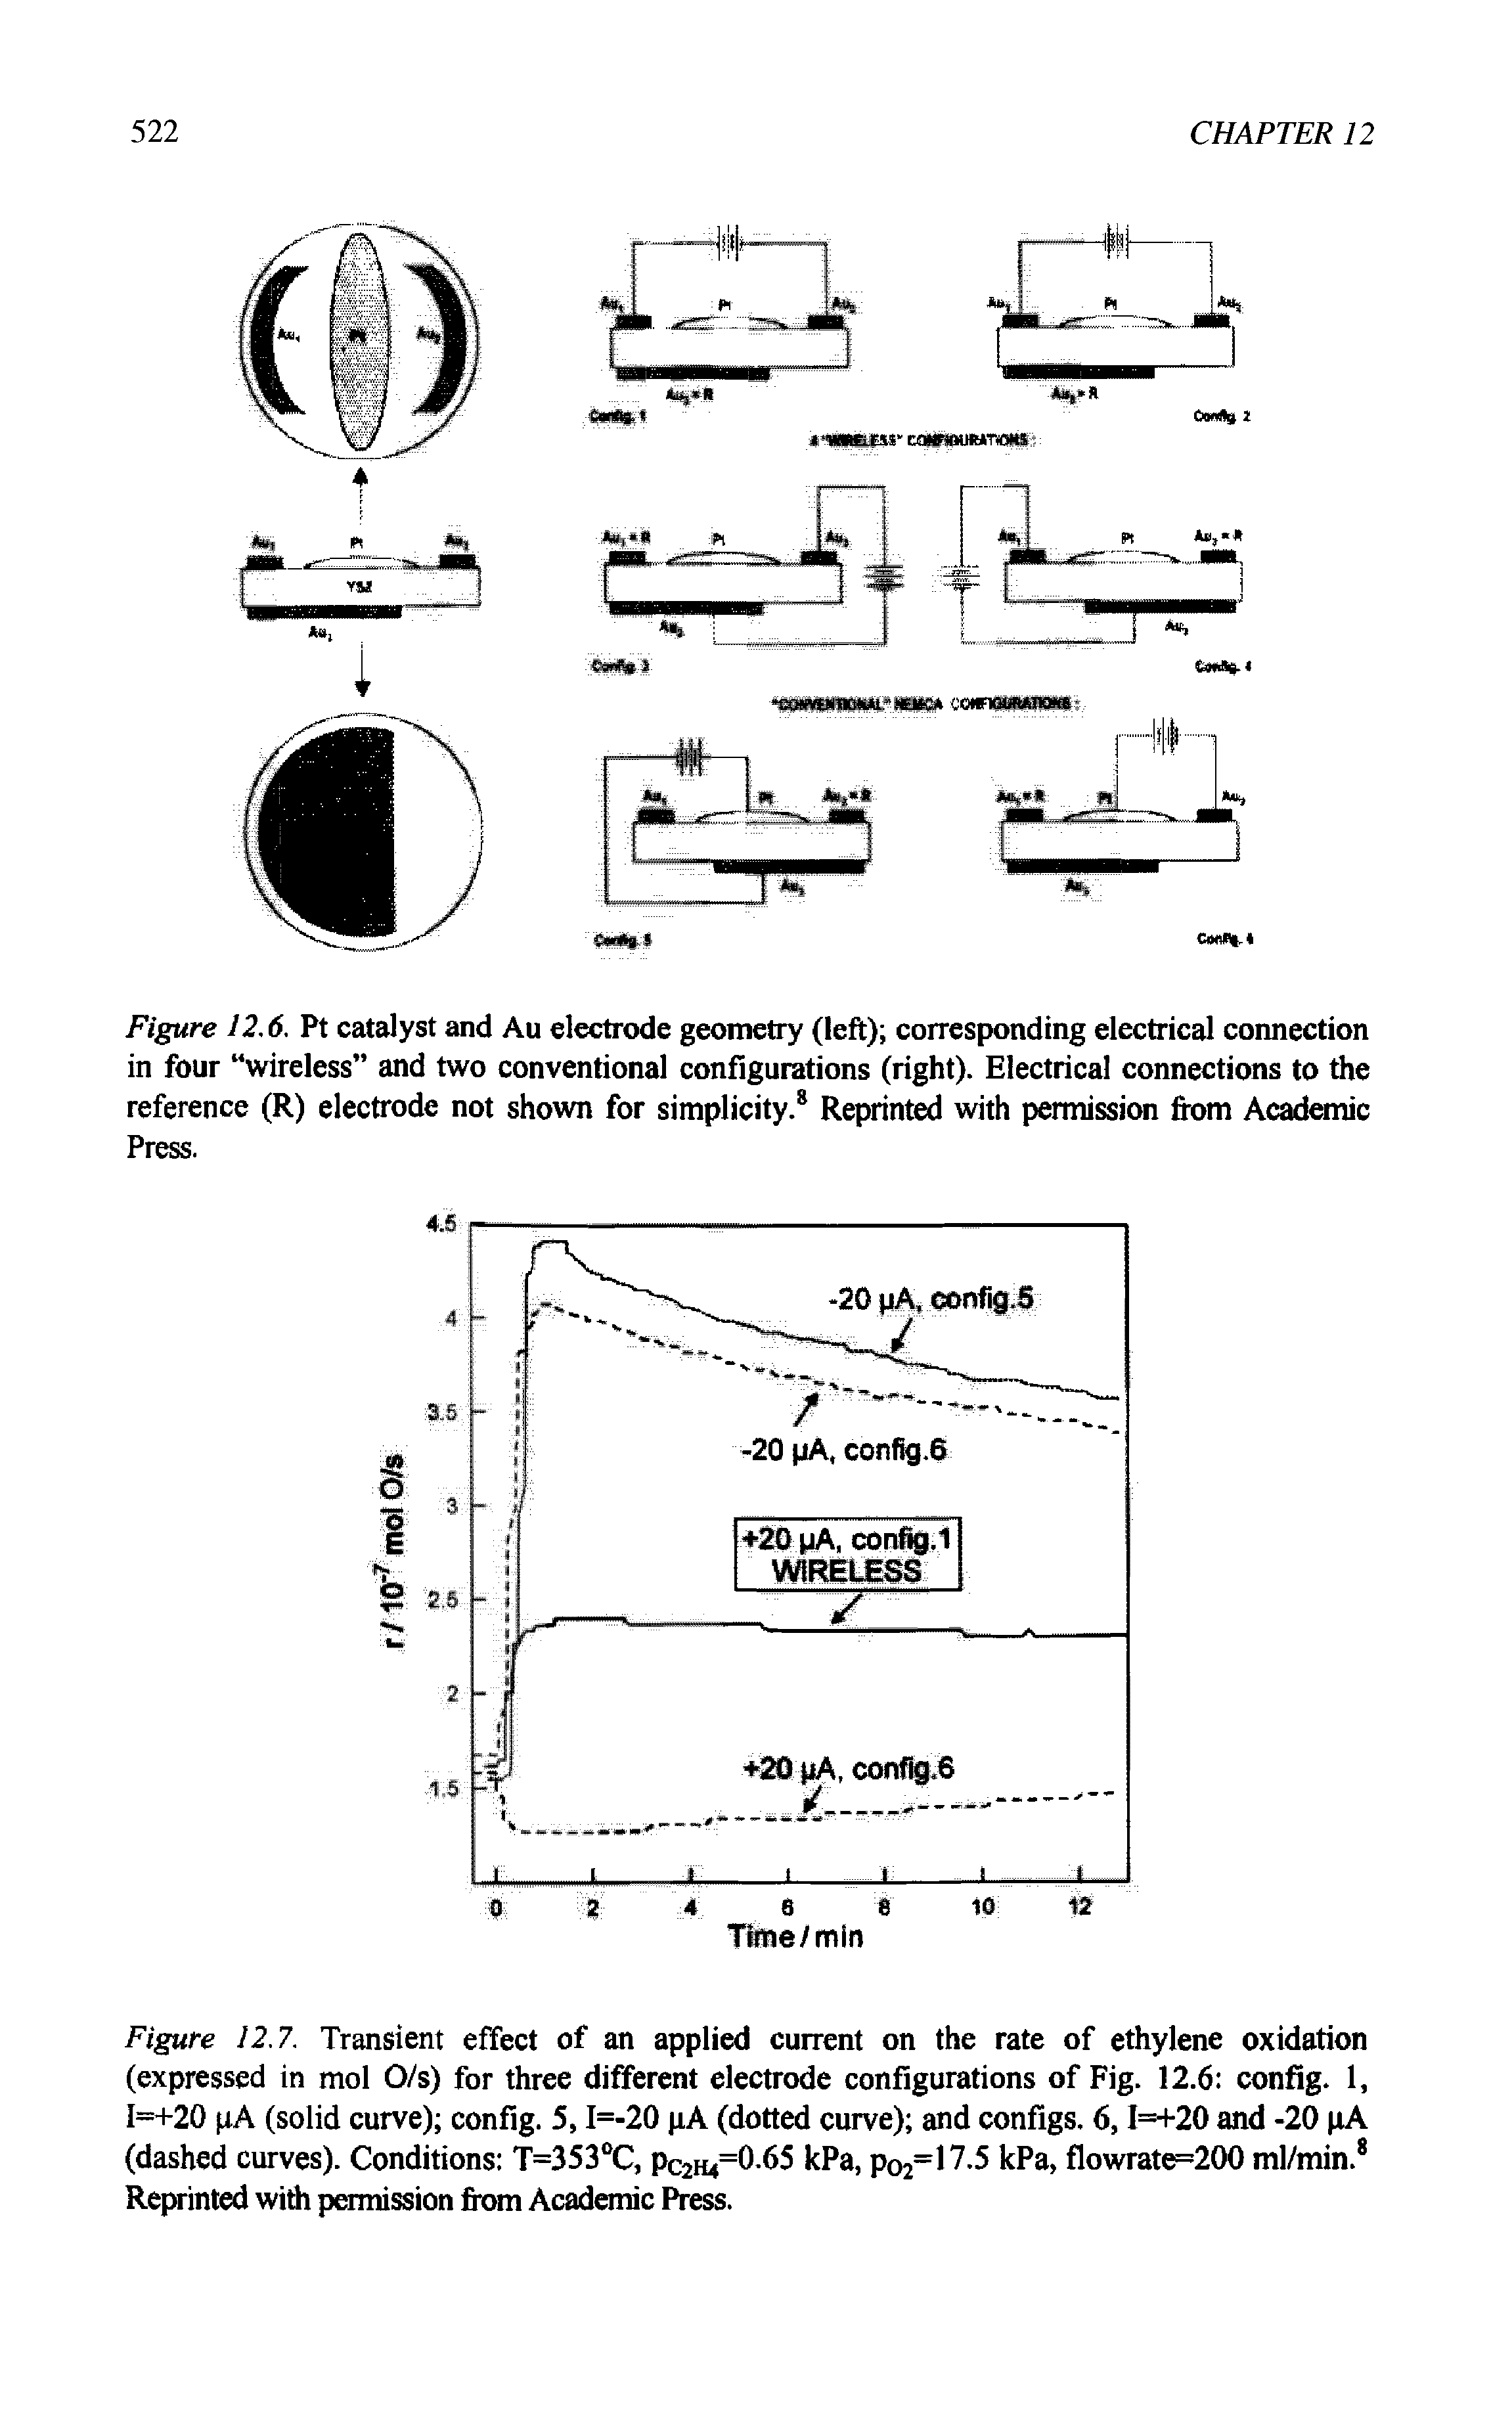 Figure 12.7. Transient effect of an applied current on the rate of ethylene oxidation (expressed in mol O/s) for three different electrode configurations of Fig. 12.6 config. 1, I=+20 pA (solid curve) config. 5, I=-20 pA (dotted curve) and configs. 6, I=+20 and -20 pA (dashed curves). Conditions T=353°C, Pc2h4=065 kPa, p02=17.5 kPa, flowrate=200 ml/min.8 Reprinted with permission from Academic Press.